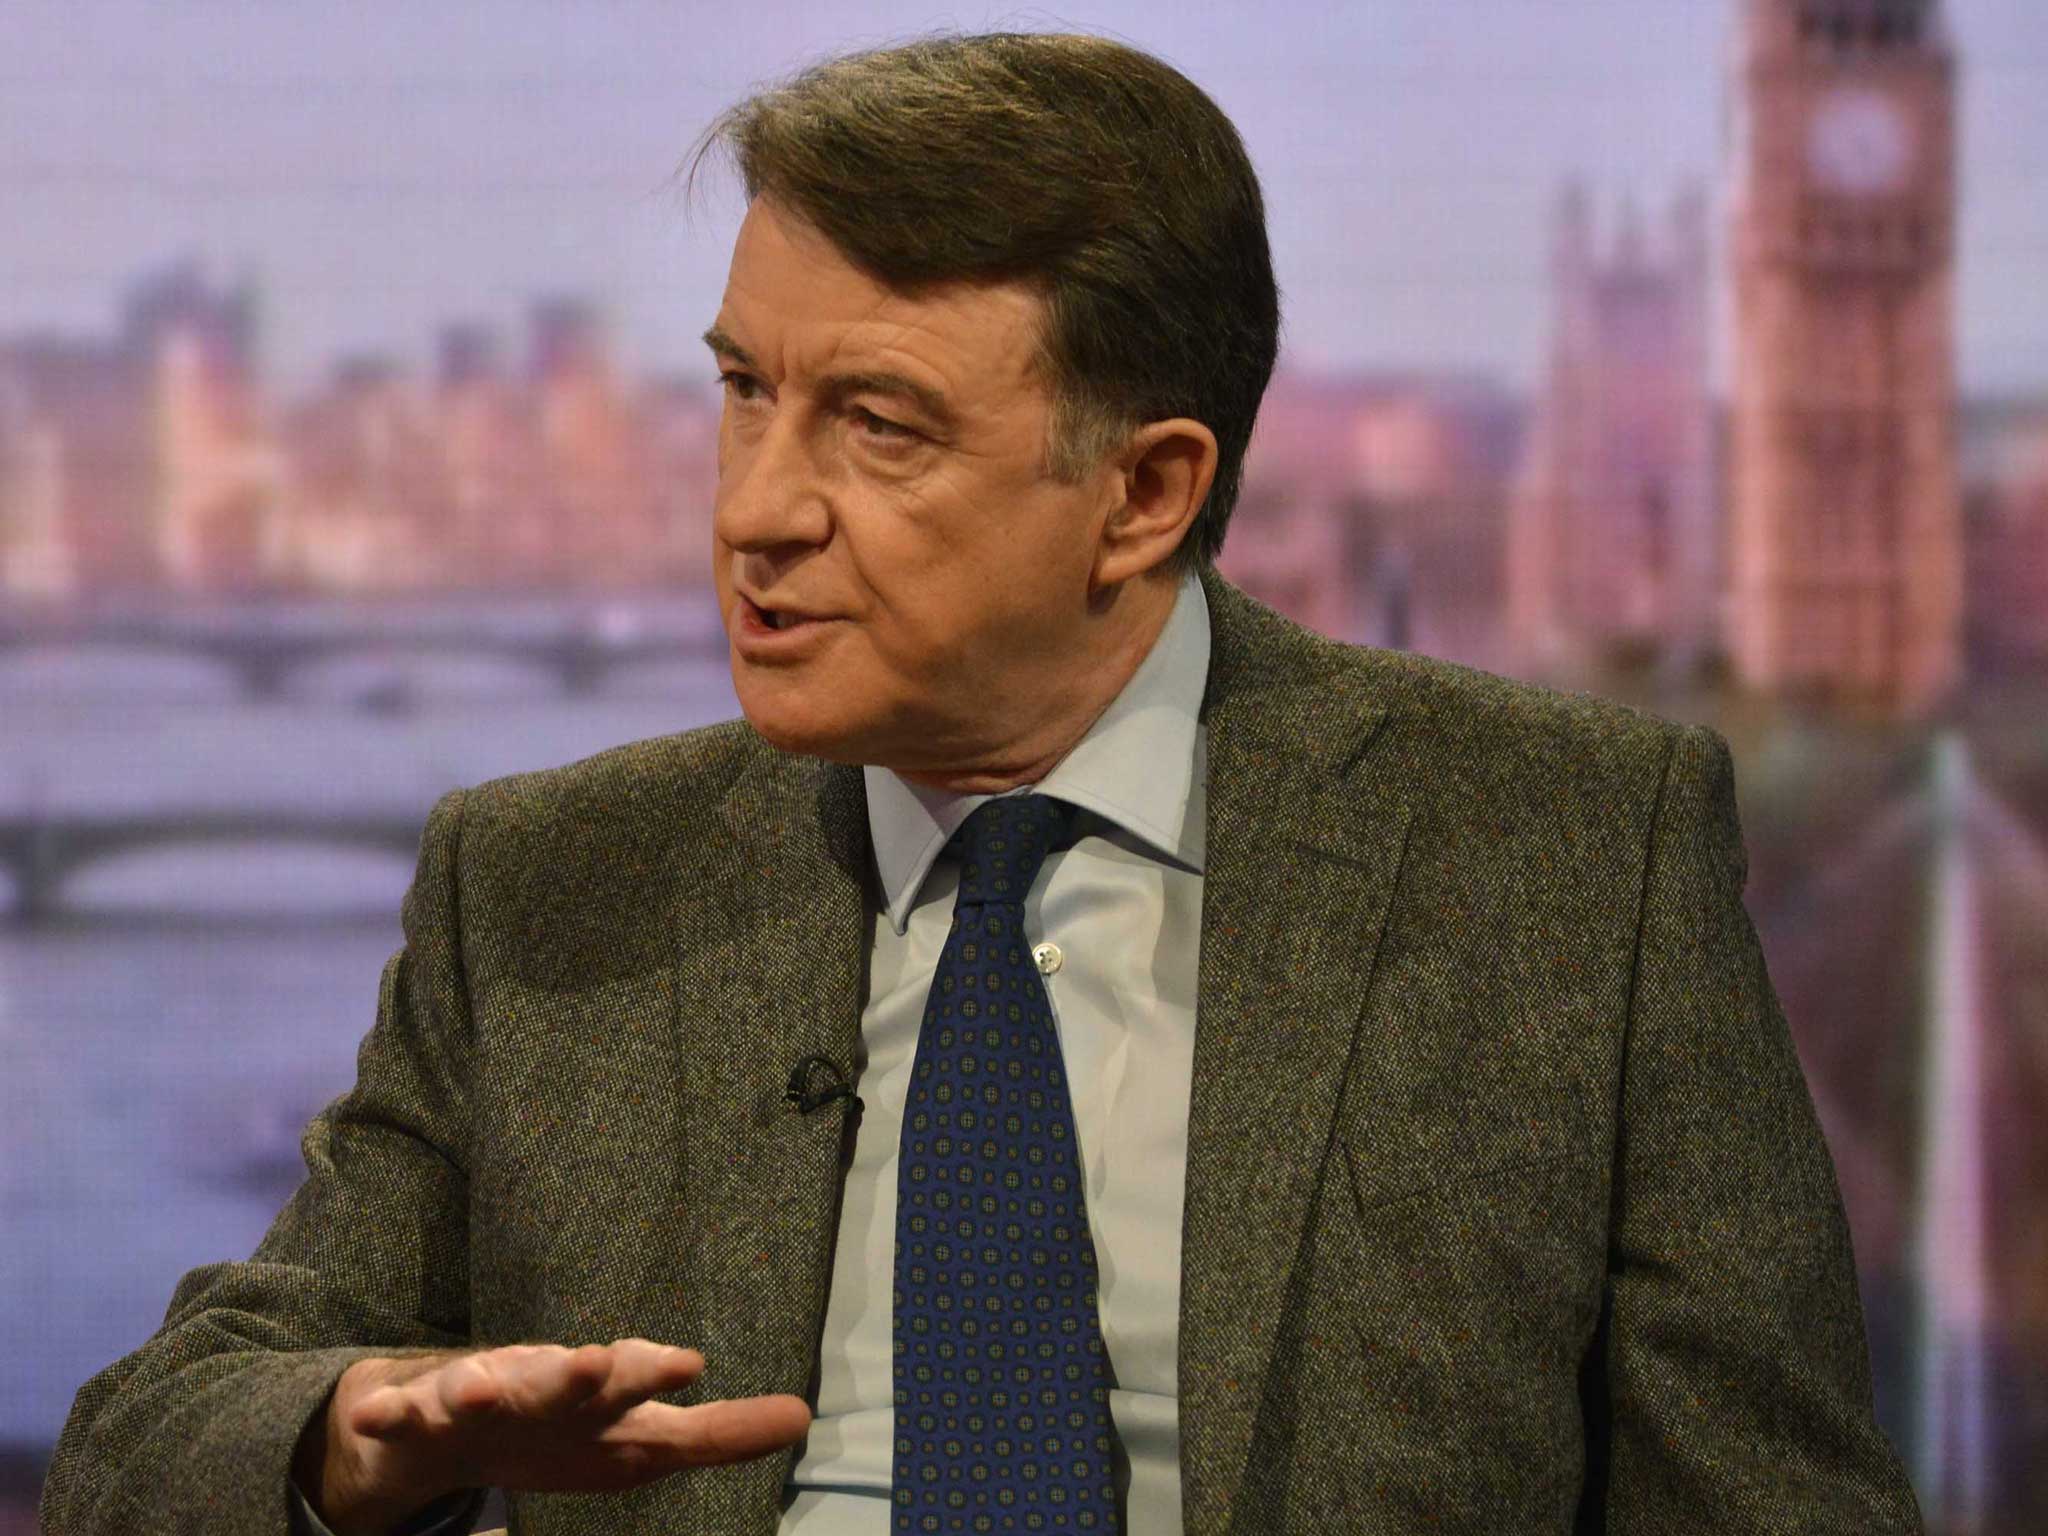 Lord Mandelson appears on BBC1's current affairs programme, The Andrew Marr Show